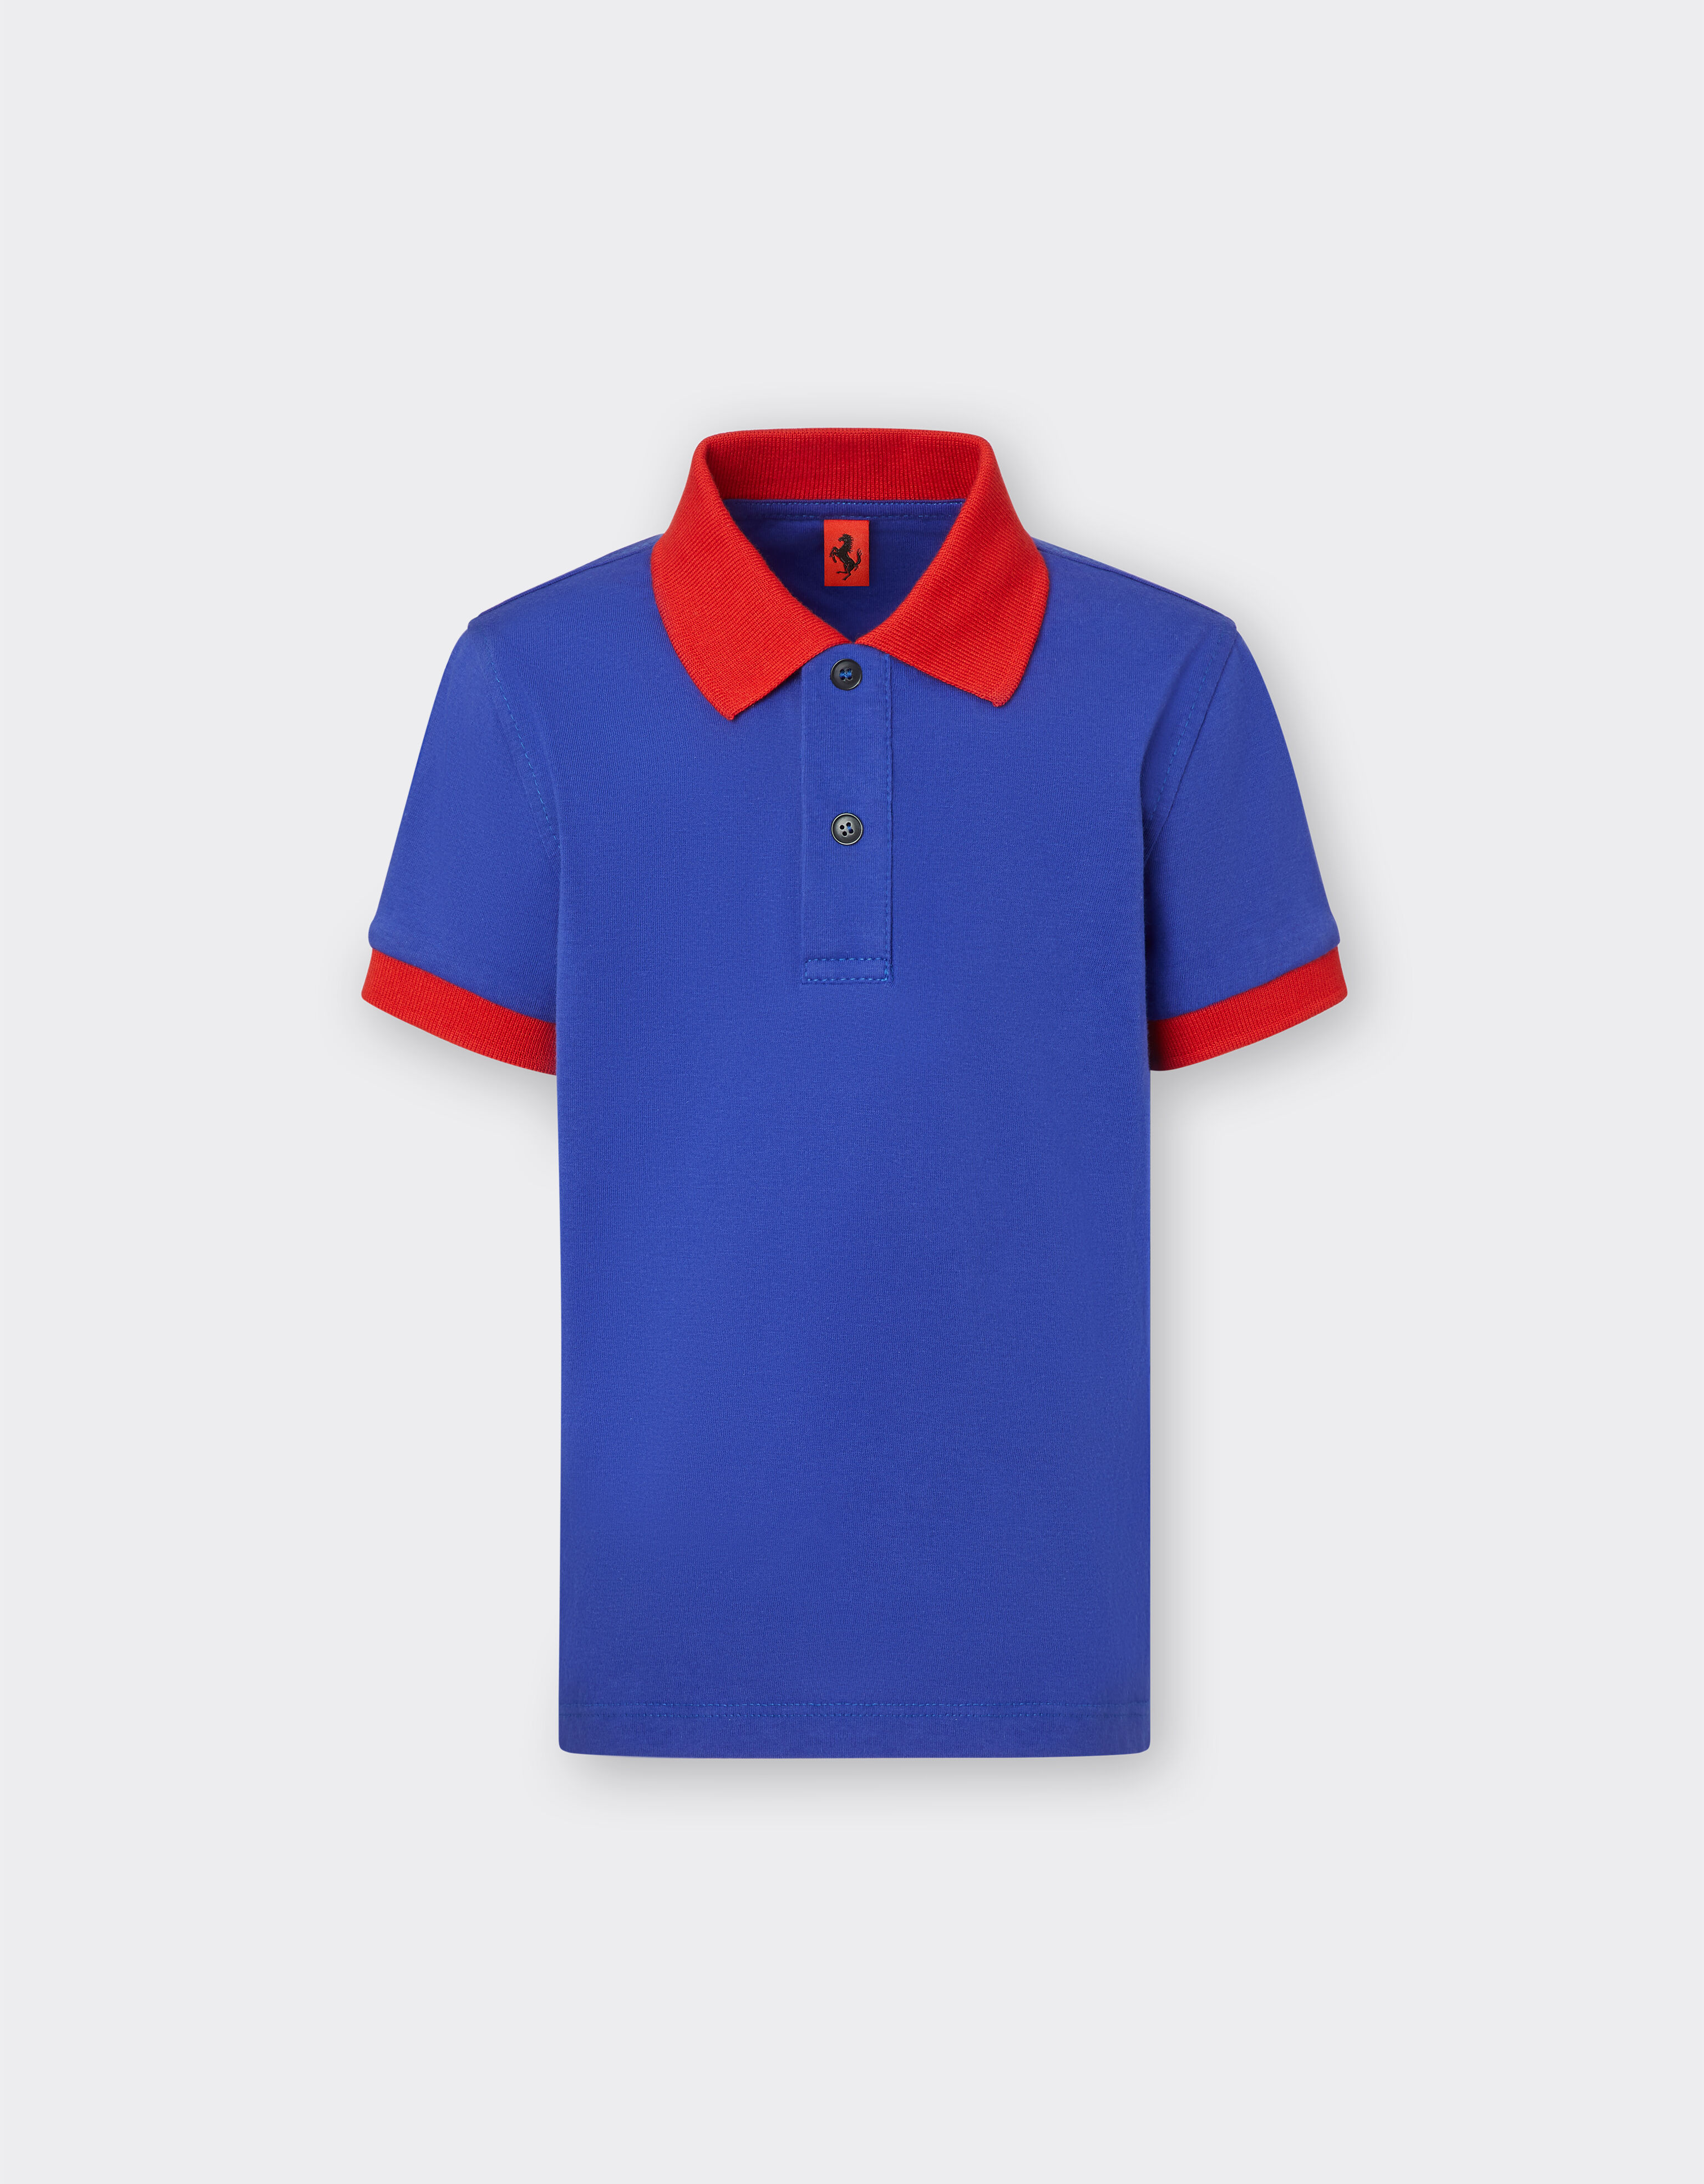 Ferrari Short sleeves - Contrast collar and cuffs - Front buttoning Rosso Corsa F1151fK